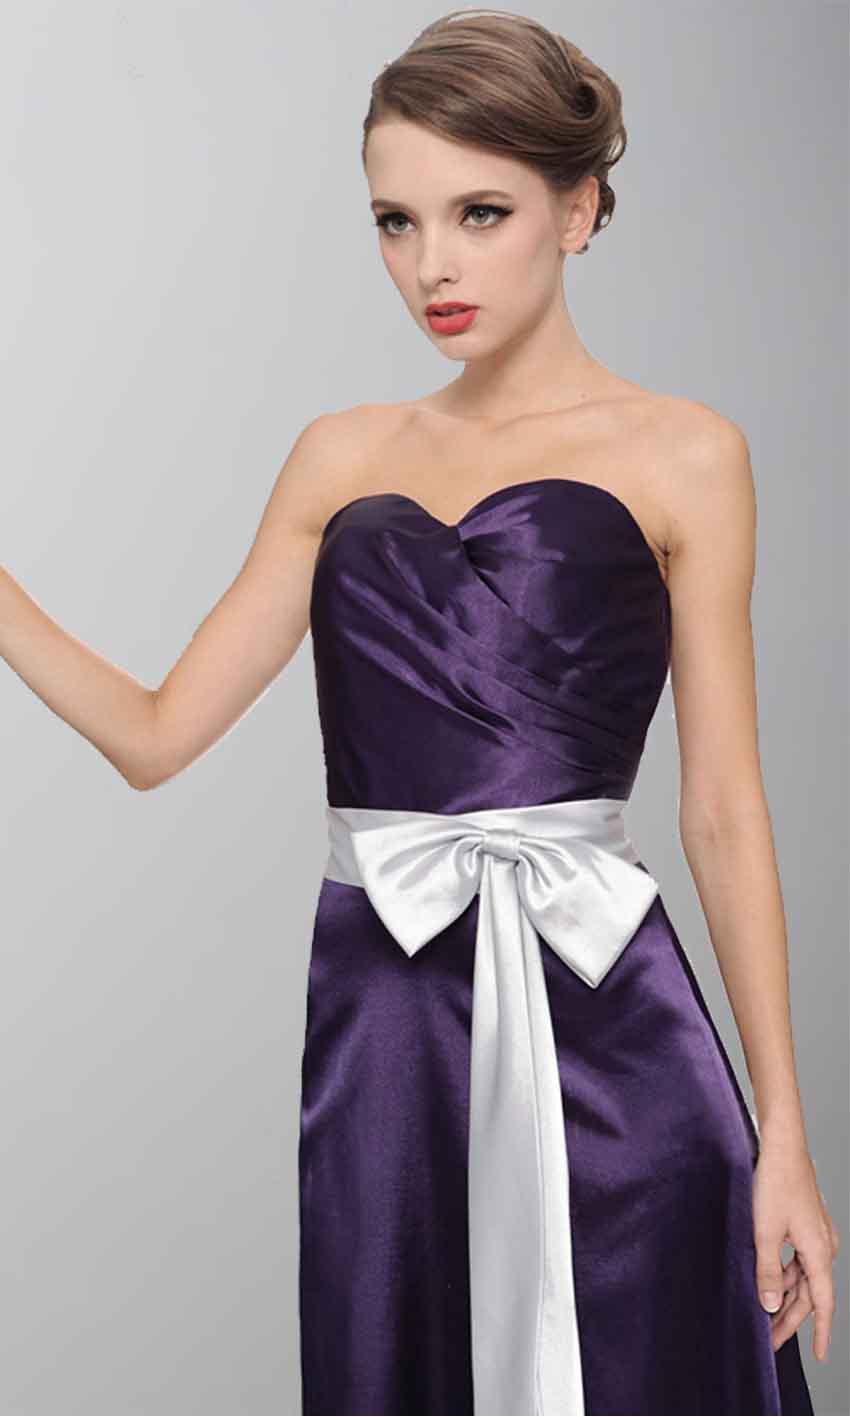 Hochzeit - Purple Strapless Sweetheart Satin Long Bridesmaid Dress KSP151 [KSP151] - £83.00 : Cheap Prom Dresses Uk, Bridesmaid Dresses, 2014 Prom & Evening Dresses, Look for cheap elegant prom dresses 2014, cocktail gowns, or dresses for special occasions? kissprom